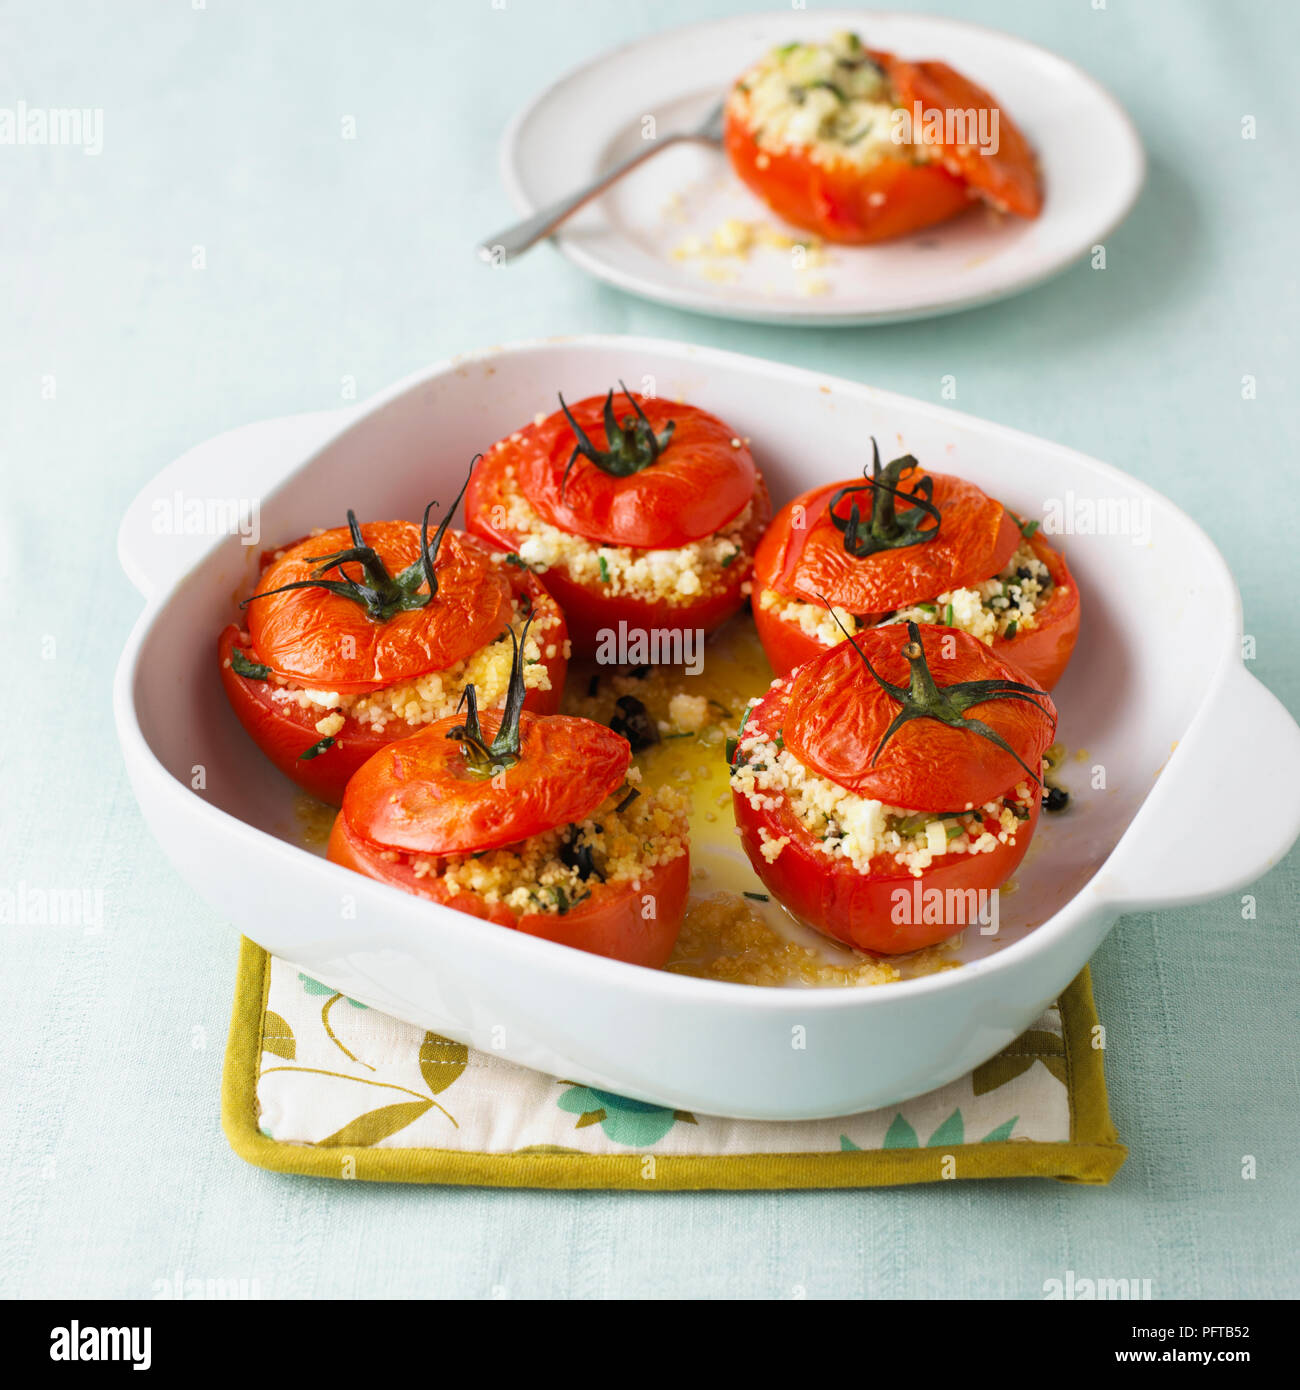 Baked tomatoes stuffed with couscous Stock Photo